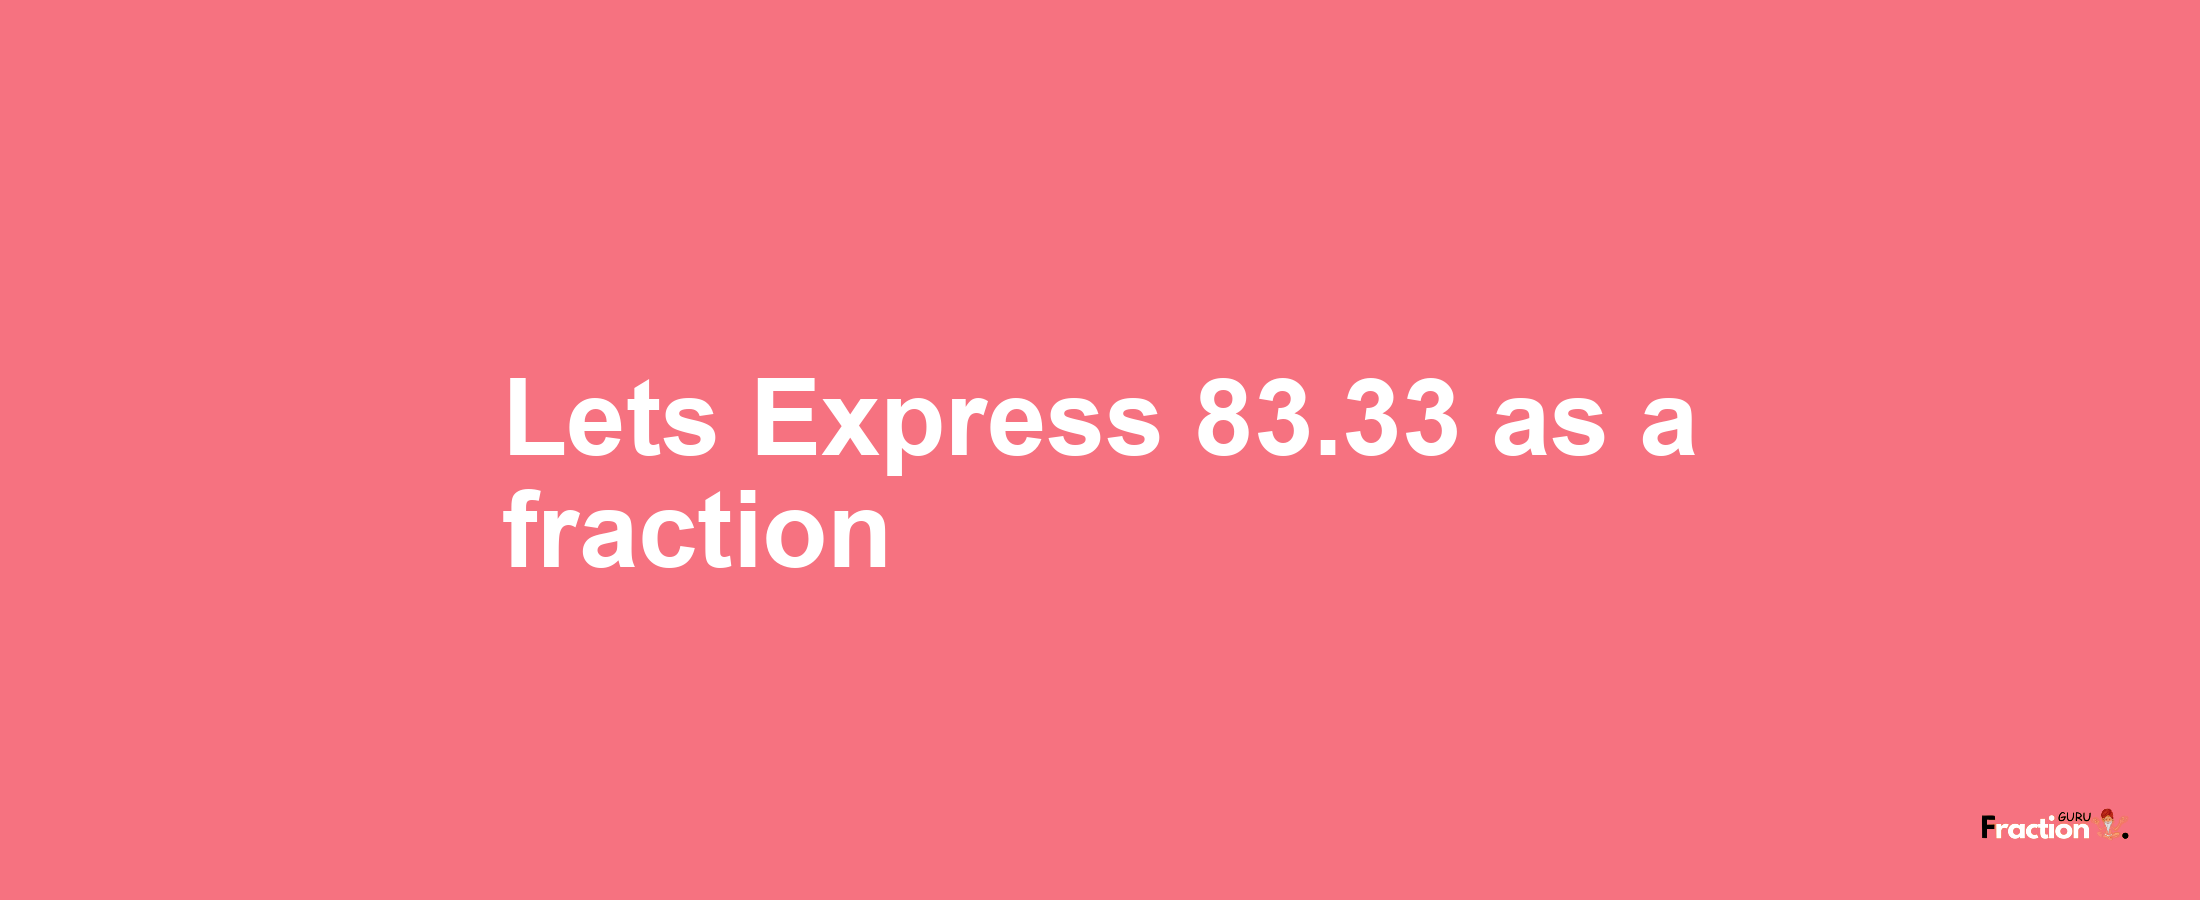 Lets Express 83.33 as afraction